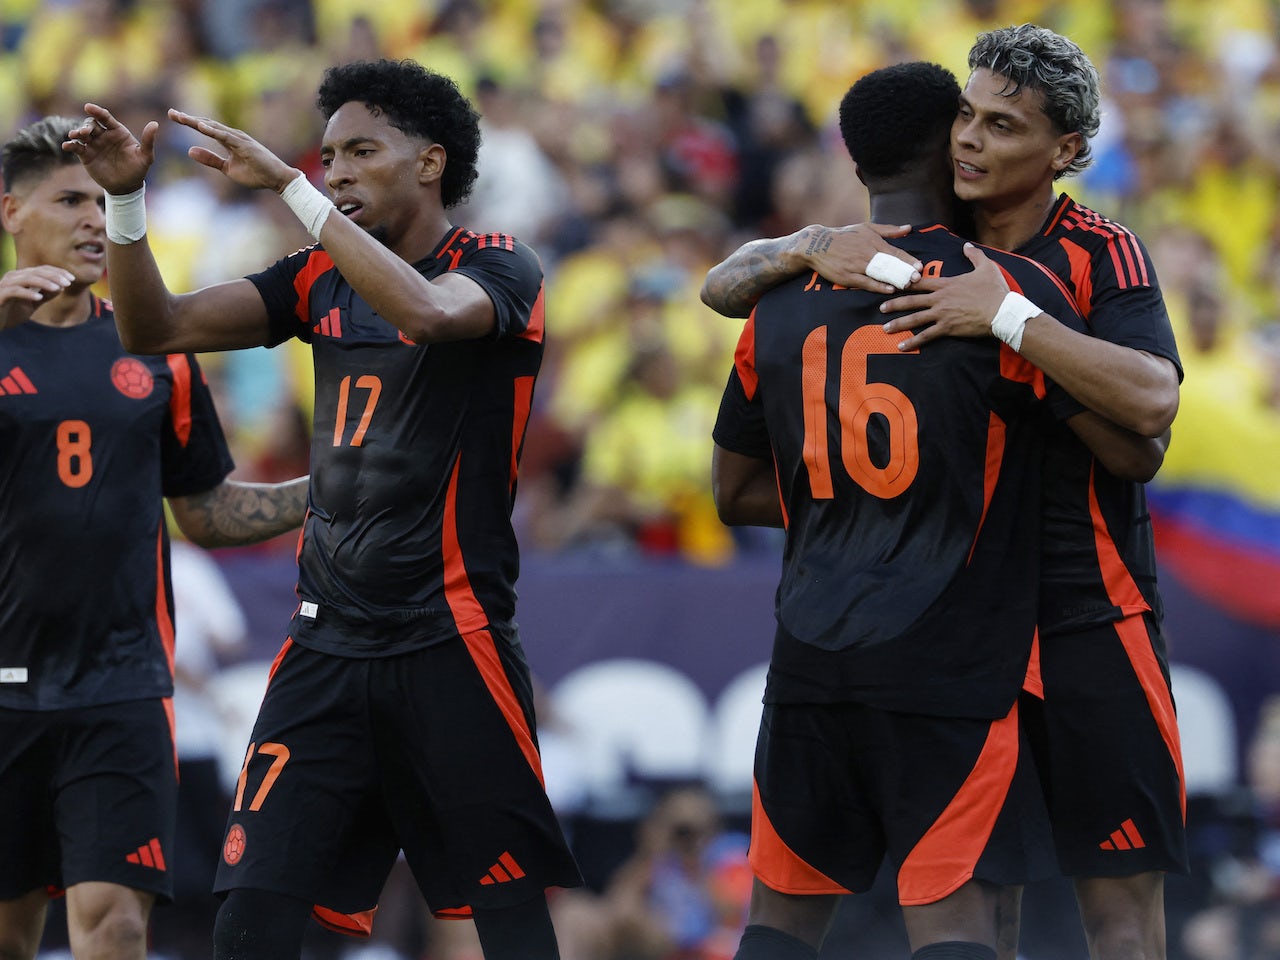 Preview: Colombia vs. Paraguay - prediction, team news, lineups